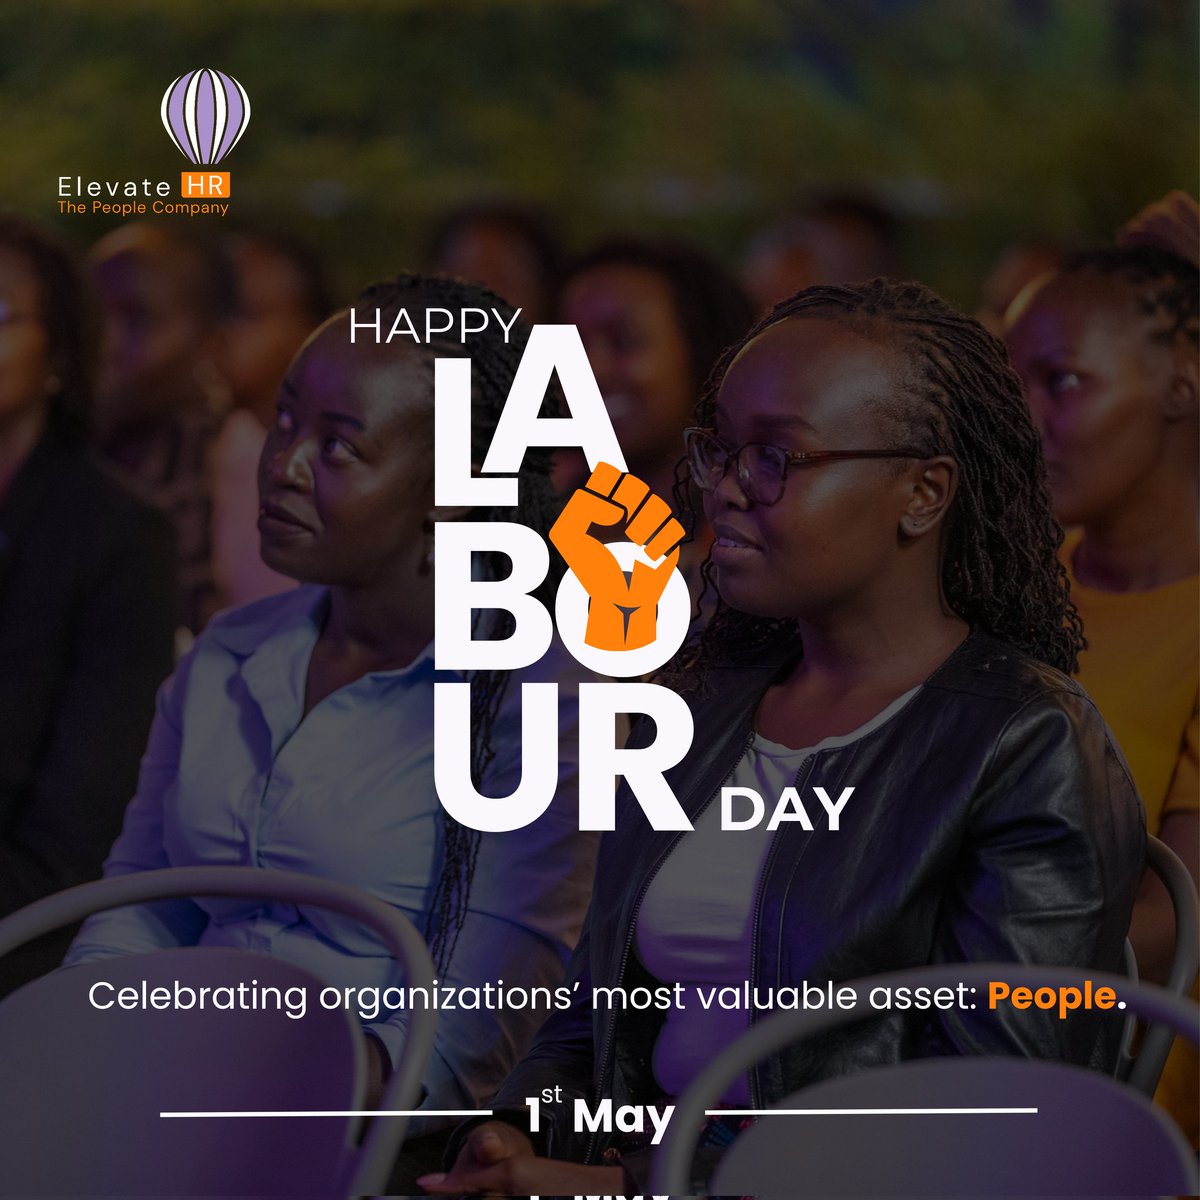 This Labour Day, let's honor employees who fuel organizational success with their hard work and dedication. Cheers to their contributions! 👏🏽

Happy Labour Day!

#LabourDay #ThePeopleCompany